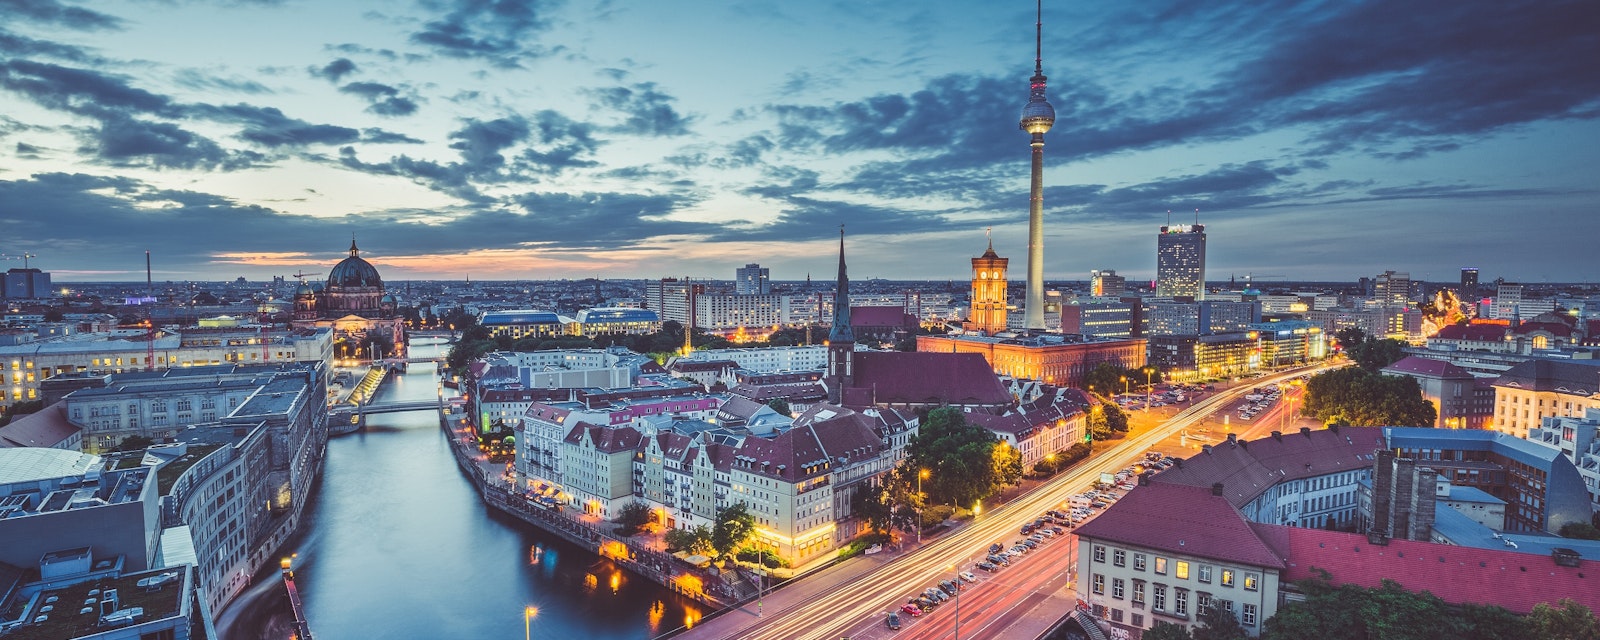 Aerial,View,Of,Berlin,Skyline,With,Dramatic,Clouds,In,Twilight